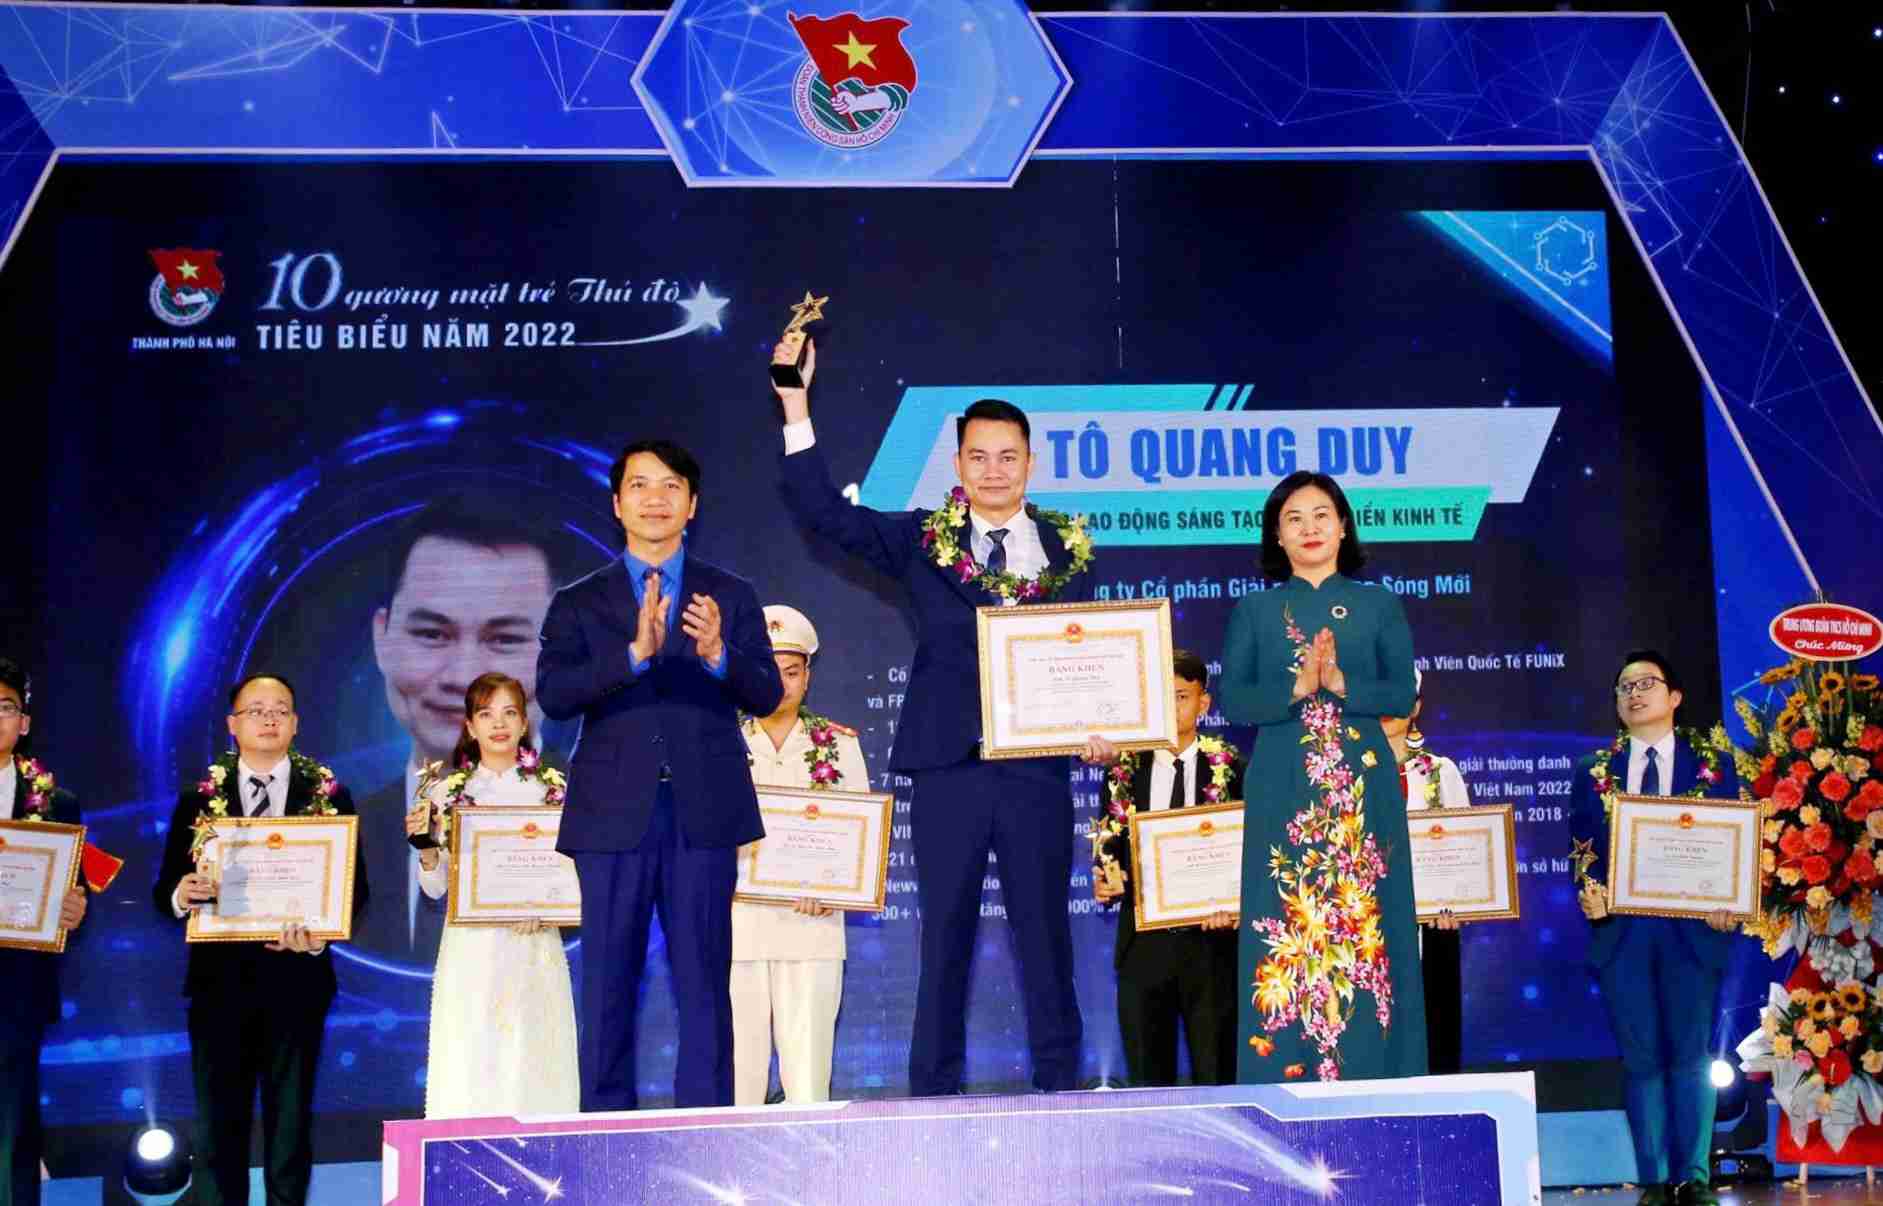 To Quang Duy received Hanoi's Top 10 Outstanding Young Faces Award in 2022